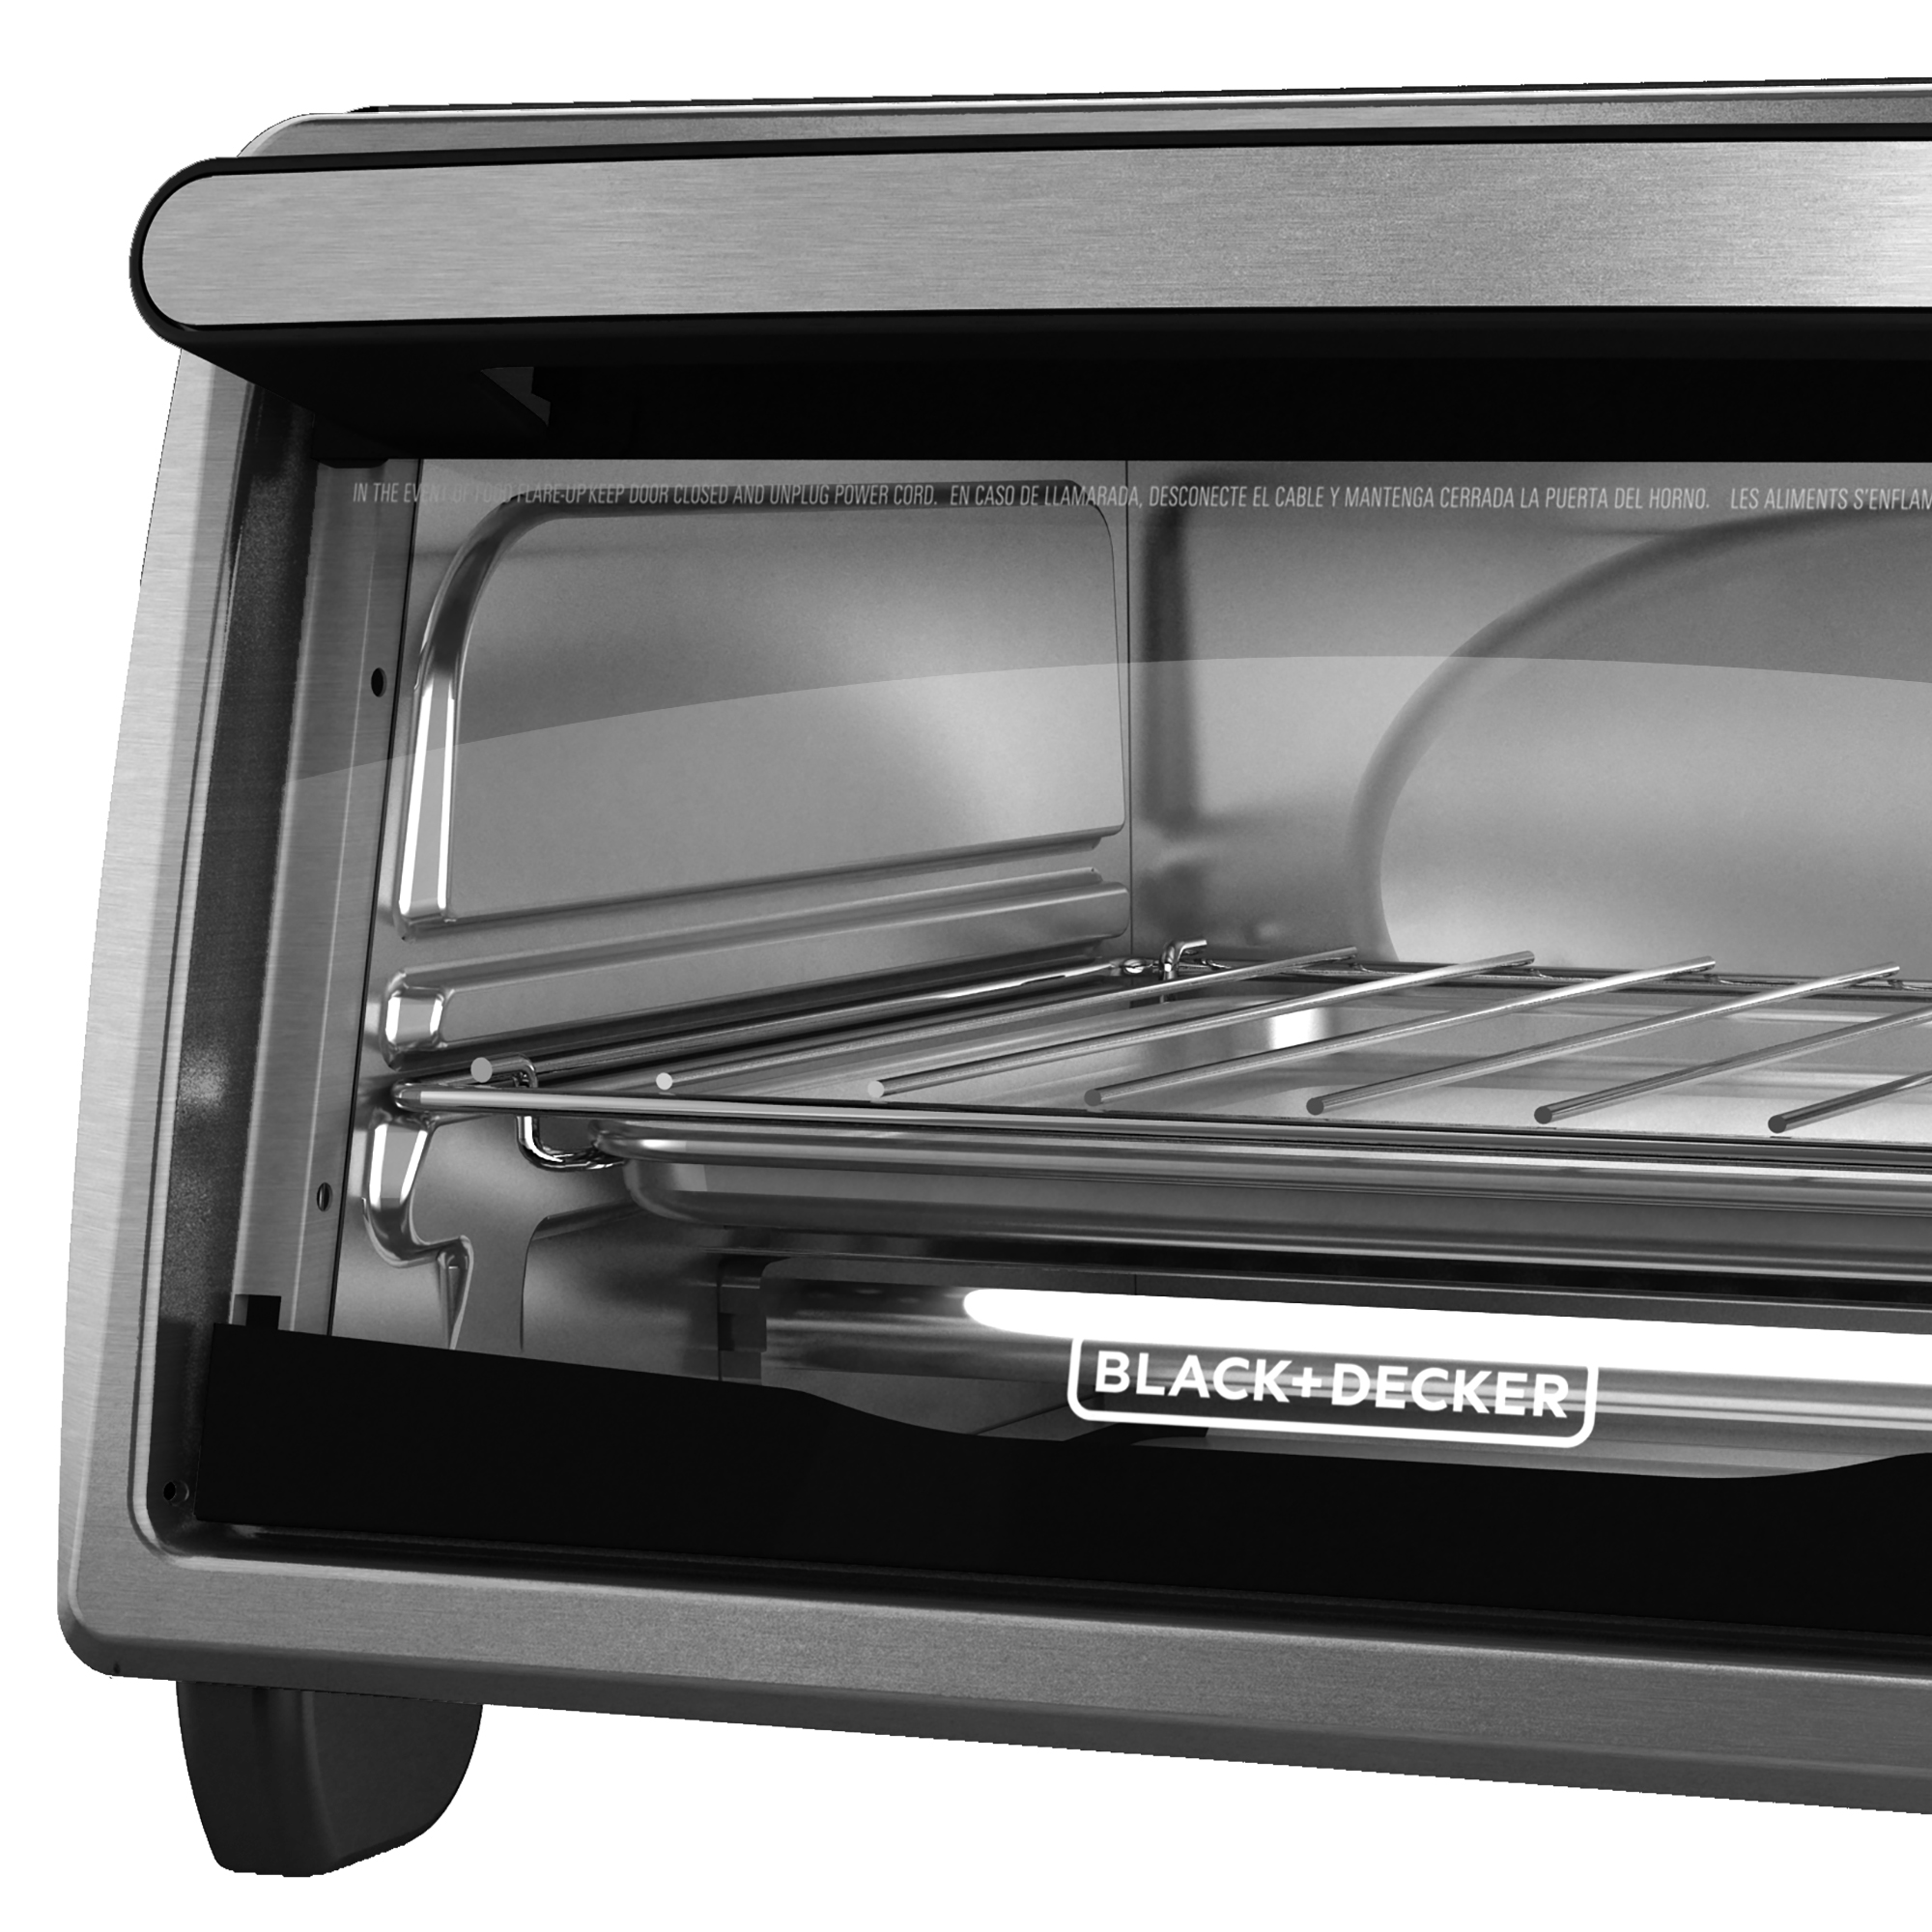 Black & Decker 4 Slice Stainless Steel Toaster Oven - image 5 of 12